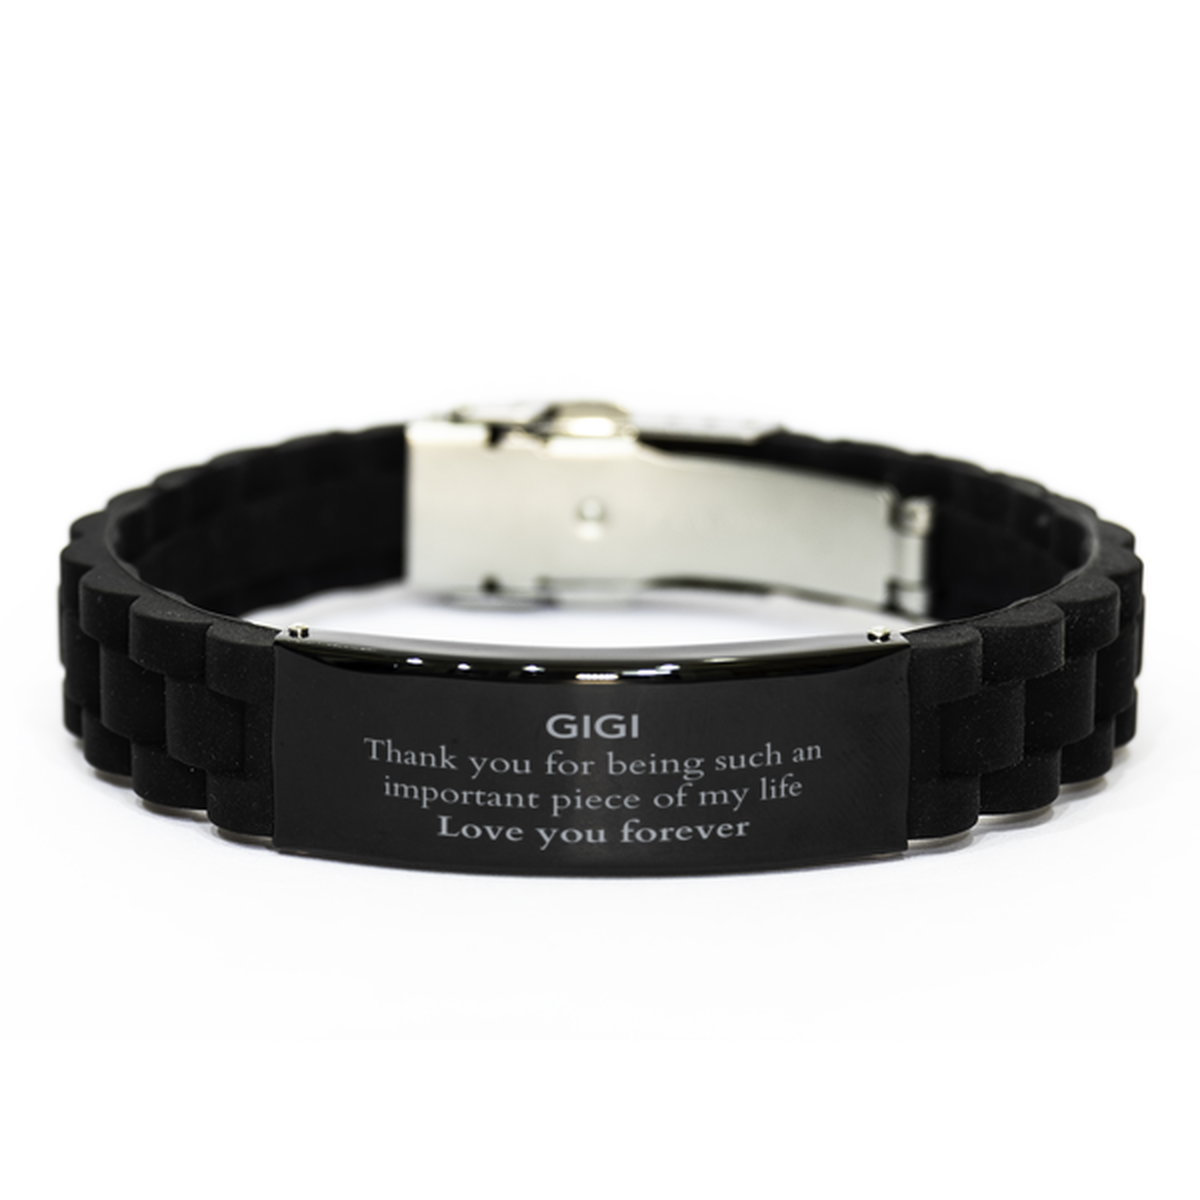 Appropriate Gigi Black Glidelock Clasp Bracelet Epic Birthday Gifts for Gigi Thank you for being such an important piece of my life Gigi Christmas Mothers Fathers Day